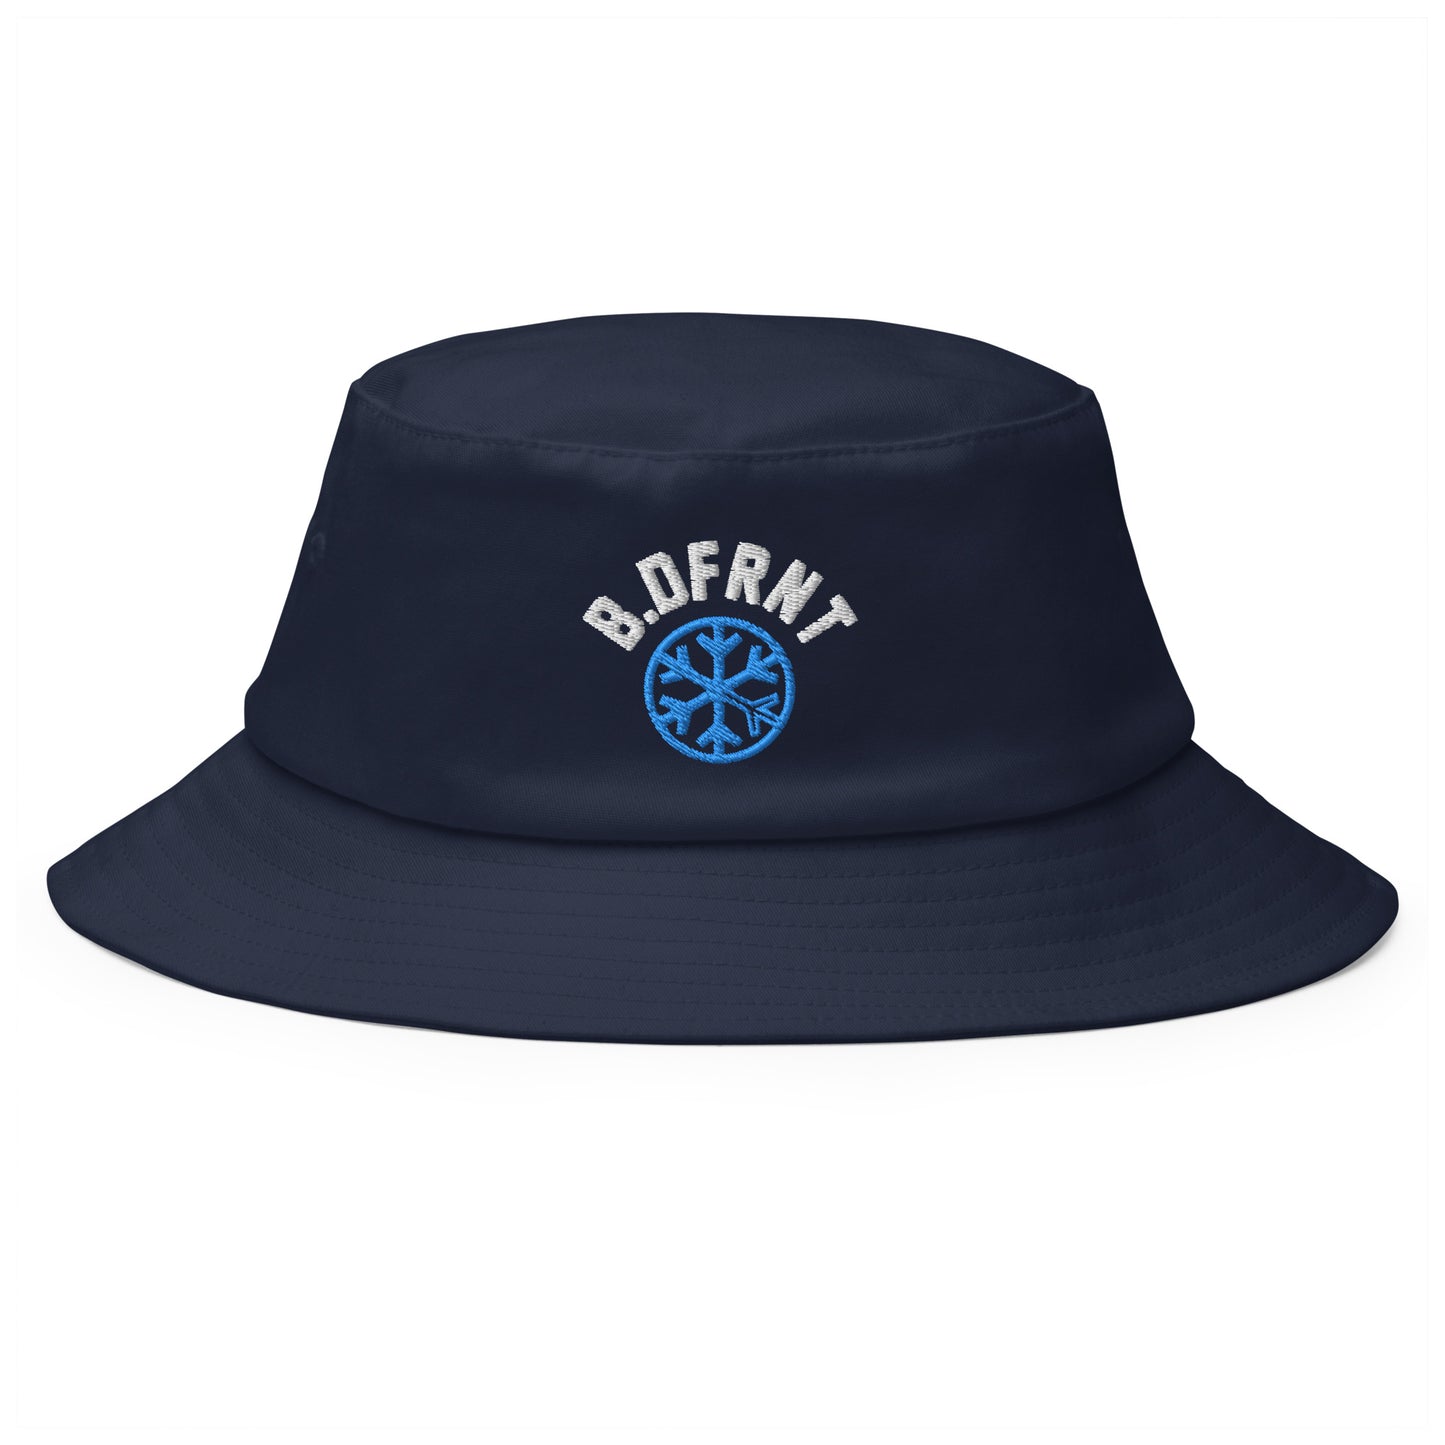 bob bucket hat navy b.dfrnt by b.different clothing independent streetwear inspired by street art graffiti